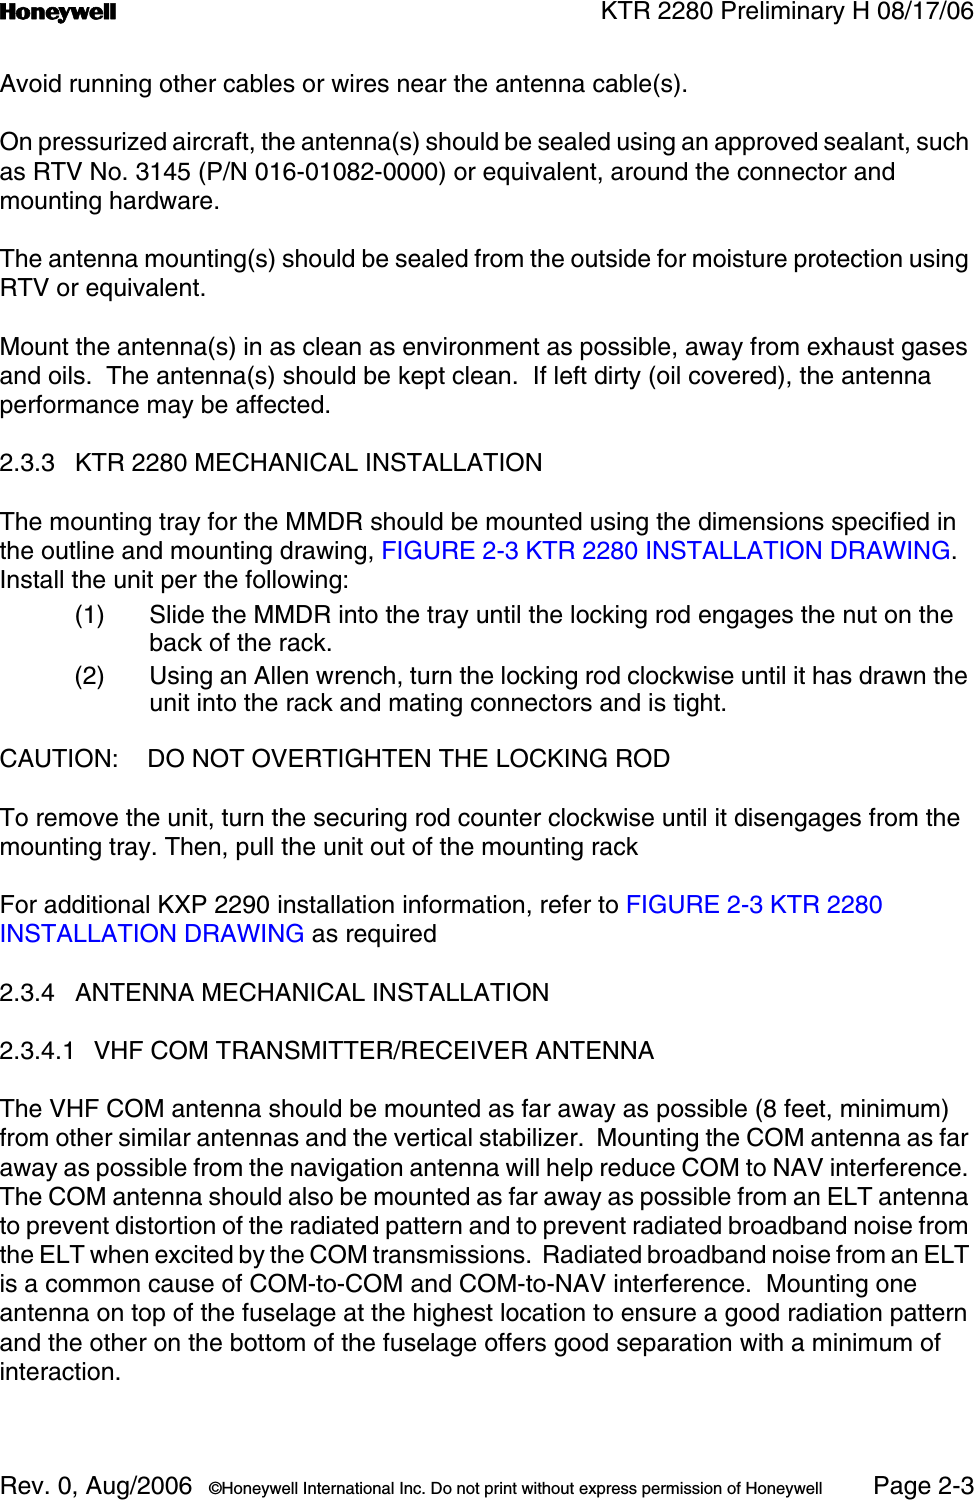 n KTR 2280 Preliminary H 08/17/06Rev. 0, Aug/2006  ©Honeywell International Inc. Do not print without express permission of Honeywell Page 2-3Avoid running other cables or wires near the antenna cable(s).On pressurized aircraft, the antenna(s) should be sealed using an approved sealant, such as RTV No. 3145 (P/N 016-01082-0000) or equivalent, around the connector and mounting hardware.The antenna mounting(s) should be sealed from the outside for moisture protection using RTV or equivalent.Mount the antenna(s) in as clean as environment as possible, away from exhaust gases and oils.  The antenna(s) should be kept clean.  If left dirty (oil covered), the antenna performance may be affected.2.3.3 KTR 2280 MECHANICAL INSTALLATIONThe mounting tray for the MMDR should be mounted using the dimensions specified in the outline and mounting drawing, FIGURE 2-3 KTR 2280 INSTALLATION DRAWING.  Install the unit per the following:(1) Slide the MMDR into the tray until the locking rod engages the nut on the back of the rack.(2) Using an Allen wrench, turn the locking rod clockwise until it has drawn the unit into the rack and mating connectors and is tight.CAUTION: DO NOT OVERTIGHTEN THE LOCKING RODTo remove the unit, turn the securing rod counter clockwise until it disengages from the mounting tray. Then, pull the unit out of the mounting rackFor additional KXP 2290 installation information, refer to FIGURE 2-3 KTR 2280 INSTALLATION DRAWING as required2.3.4 ANTENNA MECHANICAL INSTALLATION2.3.4.1 VHF COM TRANSMITTER/RECEIVER ANTENNAThe VHF COM antenna should be mounted as far away as possible (8 feet, minimum) from other similar antennas and the vertical stabilizer.  Mounting the COM antenna as far away as possible from the navigation antenna will help reduce COM to NAV interference. The COM antenna should also be mounted as far away as possible from an ELT antenna to prevent distortion of the radiated pattern and to prevent radiated broadband noise from the ELT when excited by the COM transmissions.  Radiated broadband noise from an ELT is a common cause of COM-to-COM and COM-to-NAV interference.  Mounting one antenna on top of the fuselage at the highest location to ensure a good radiation pattern and the other on the bottom of the fuselage offers good separation with a minimum of interaction.